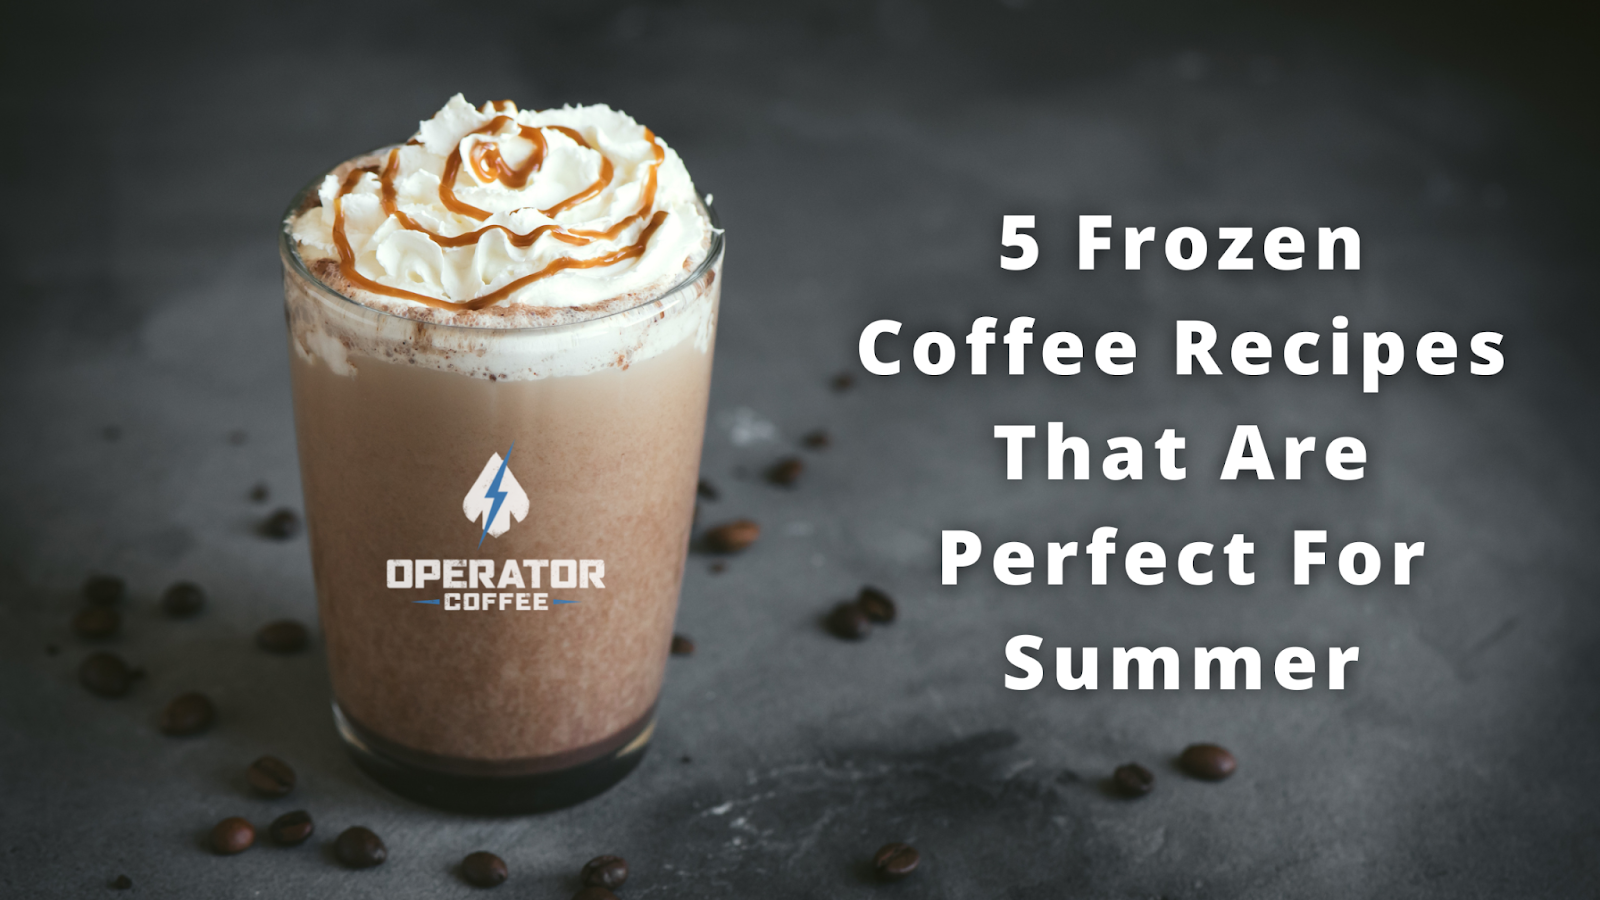 5 Frozen Coffee Recipes That Are Perfect For Summer